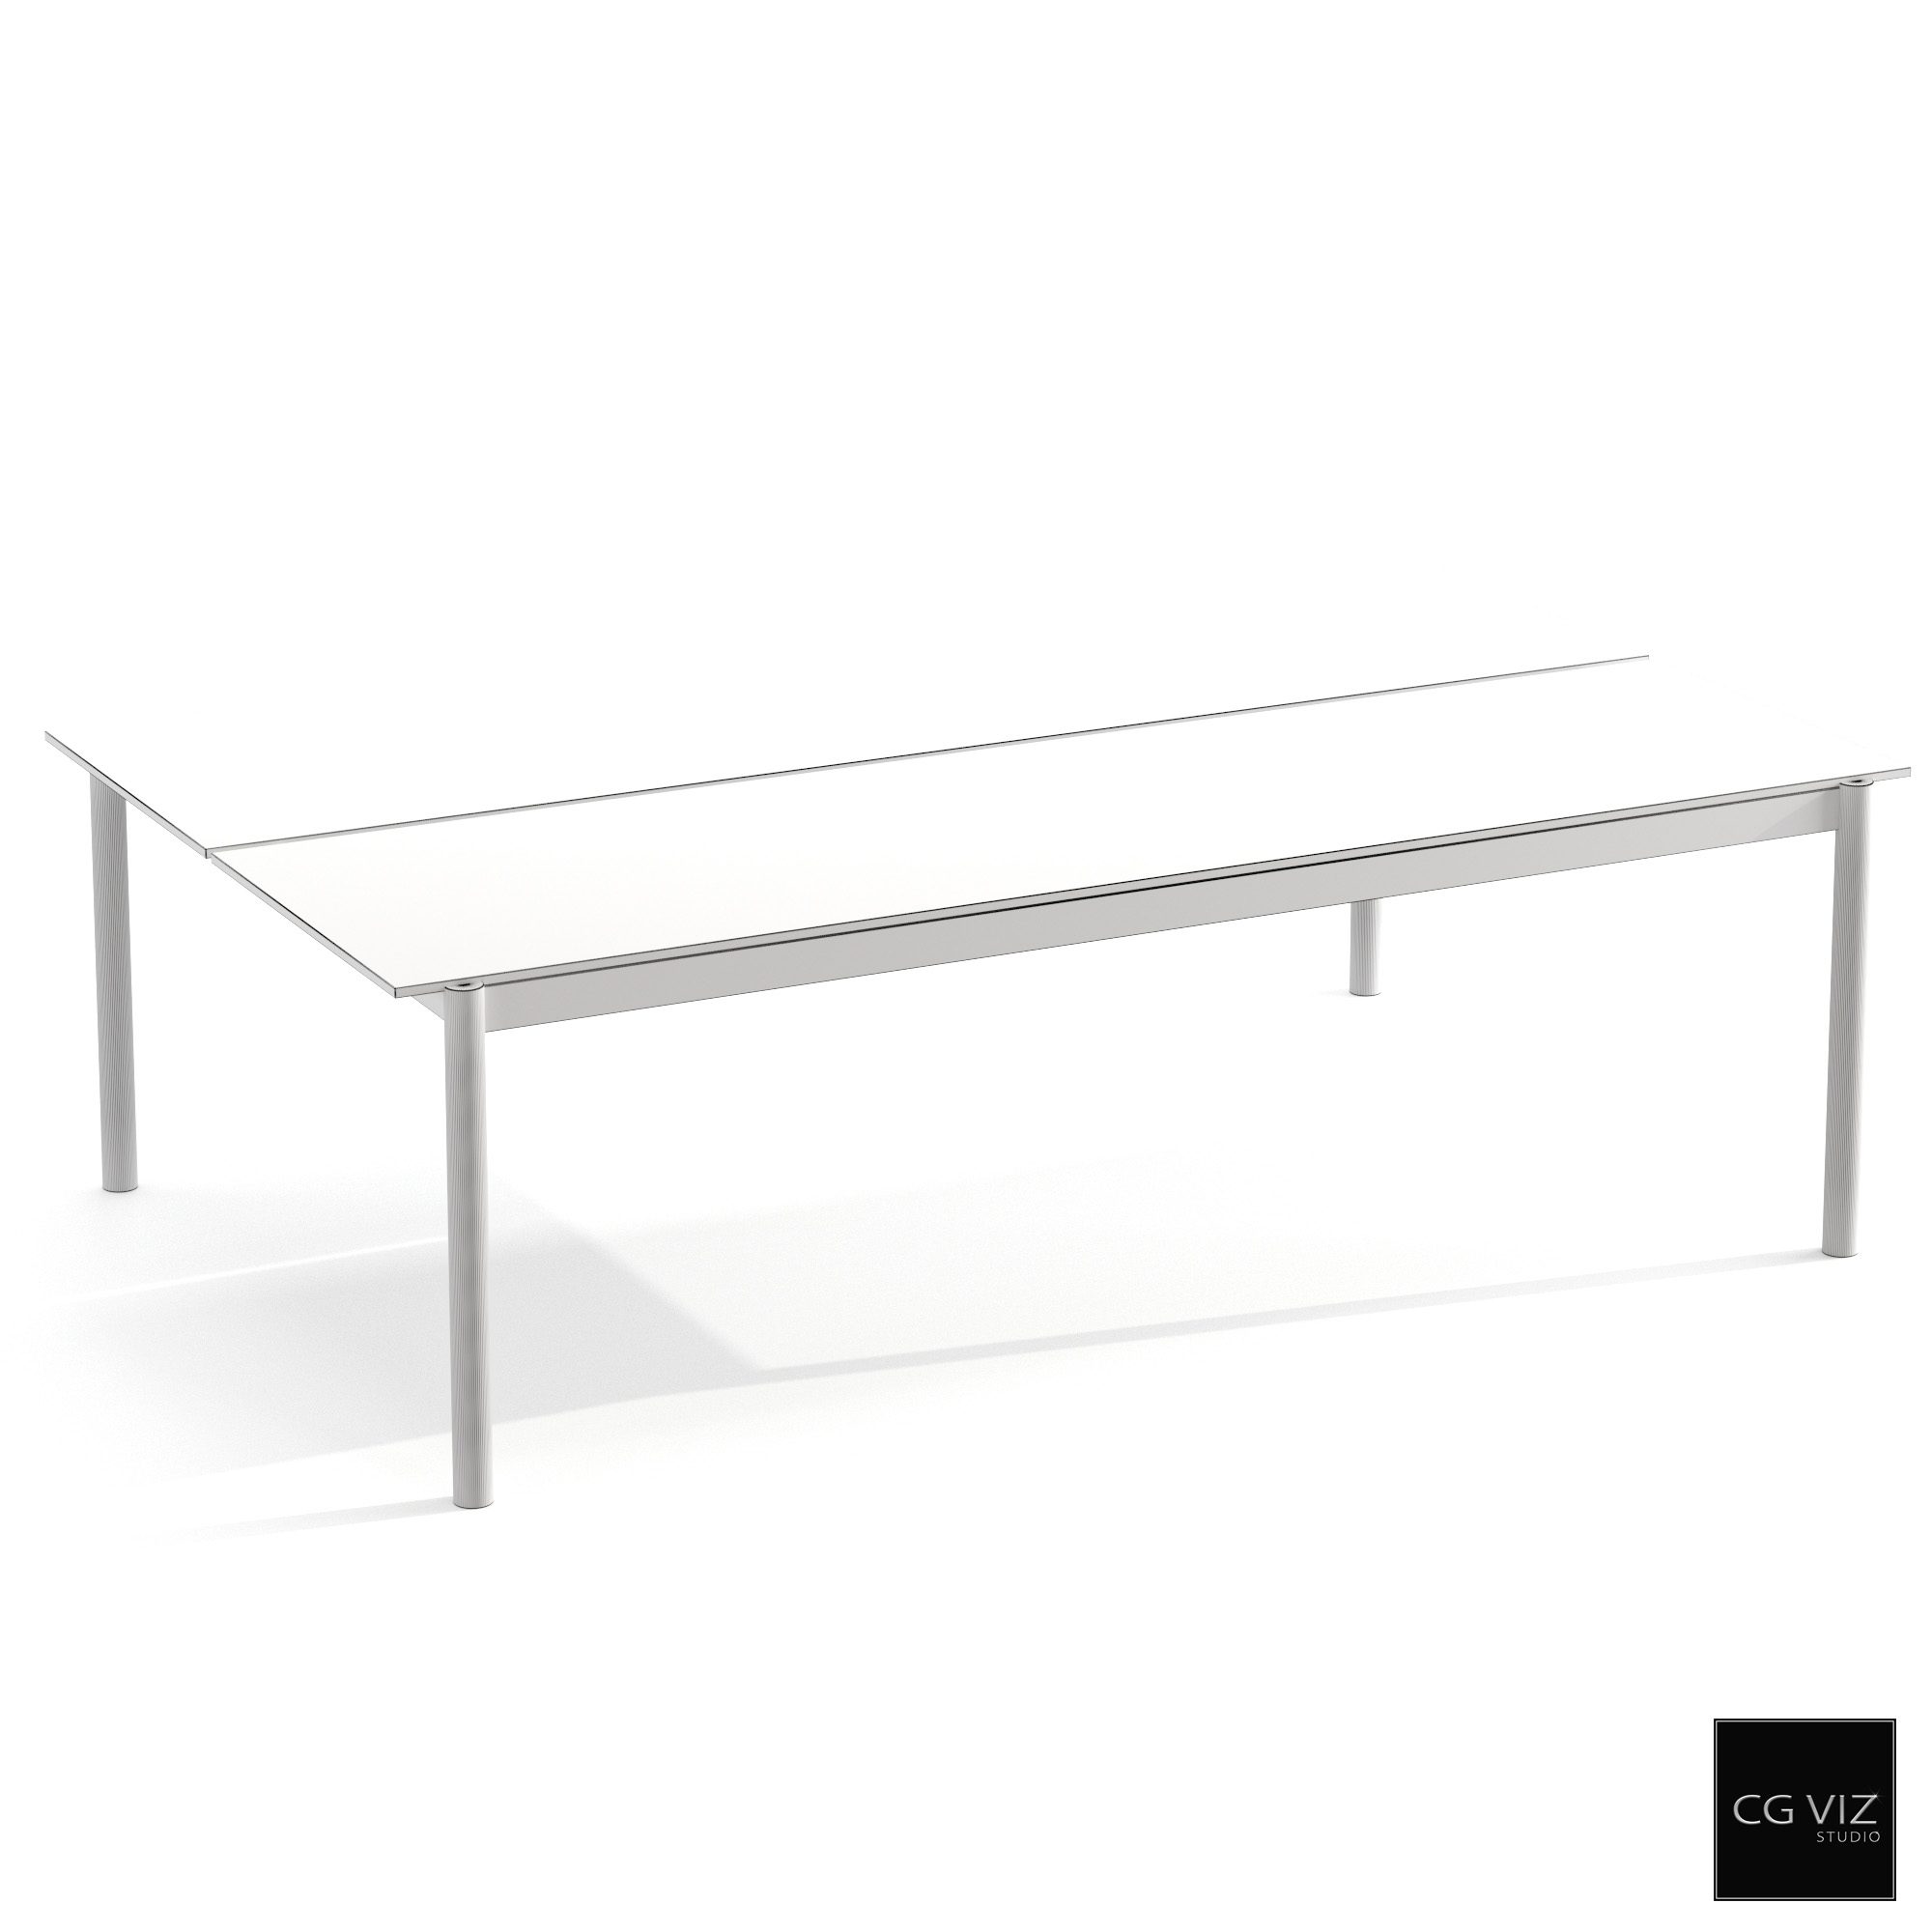 Wireframe View of Muuto Linear System Table 3D Model